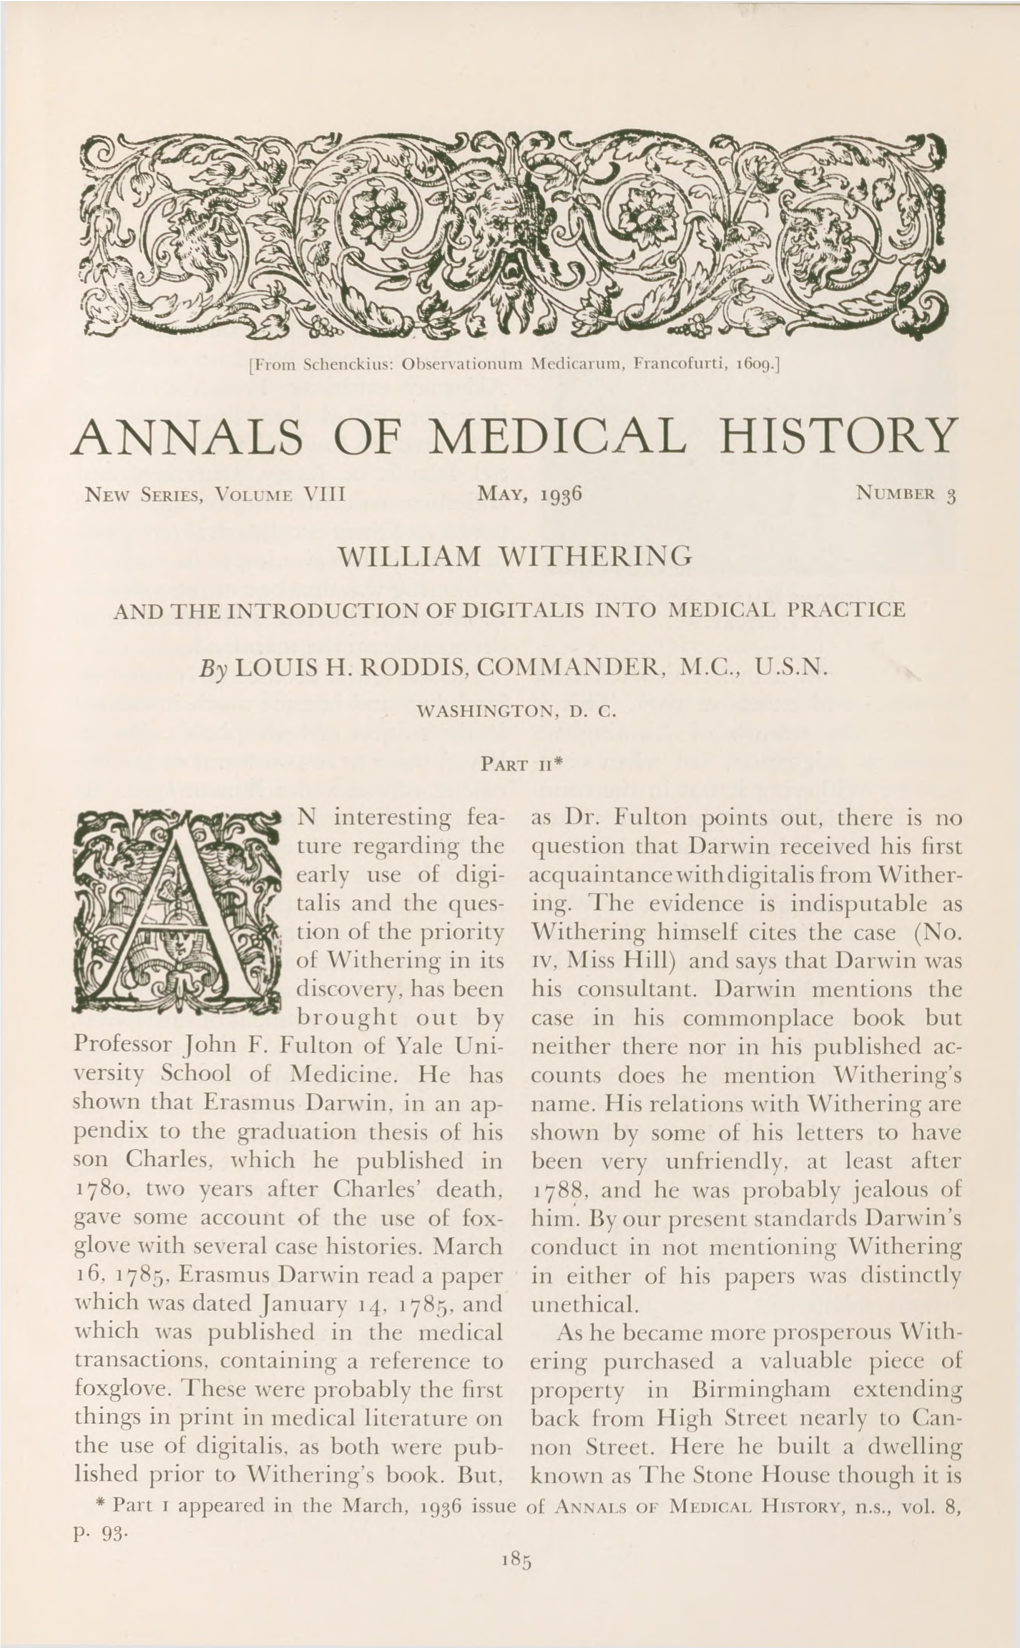 William Withering and the Introduction of Digitalis Into Medical Practice